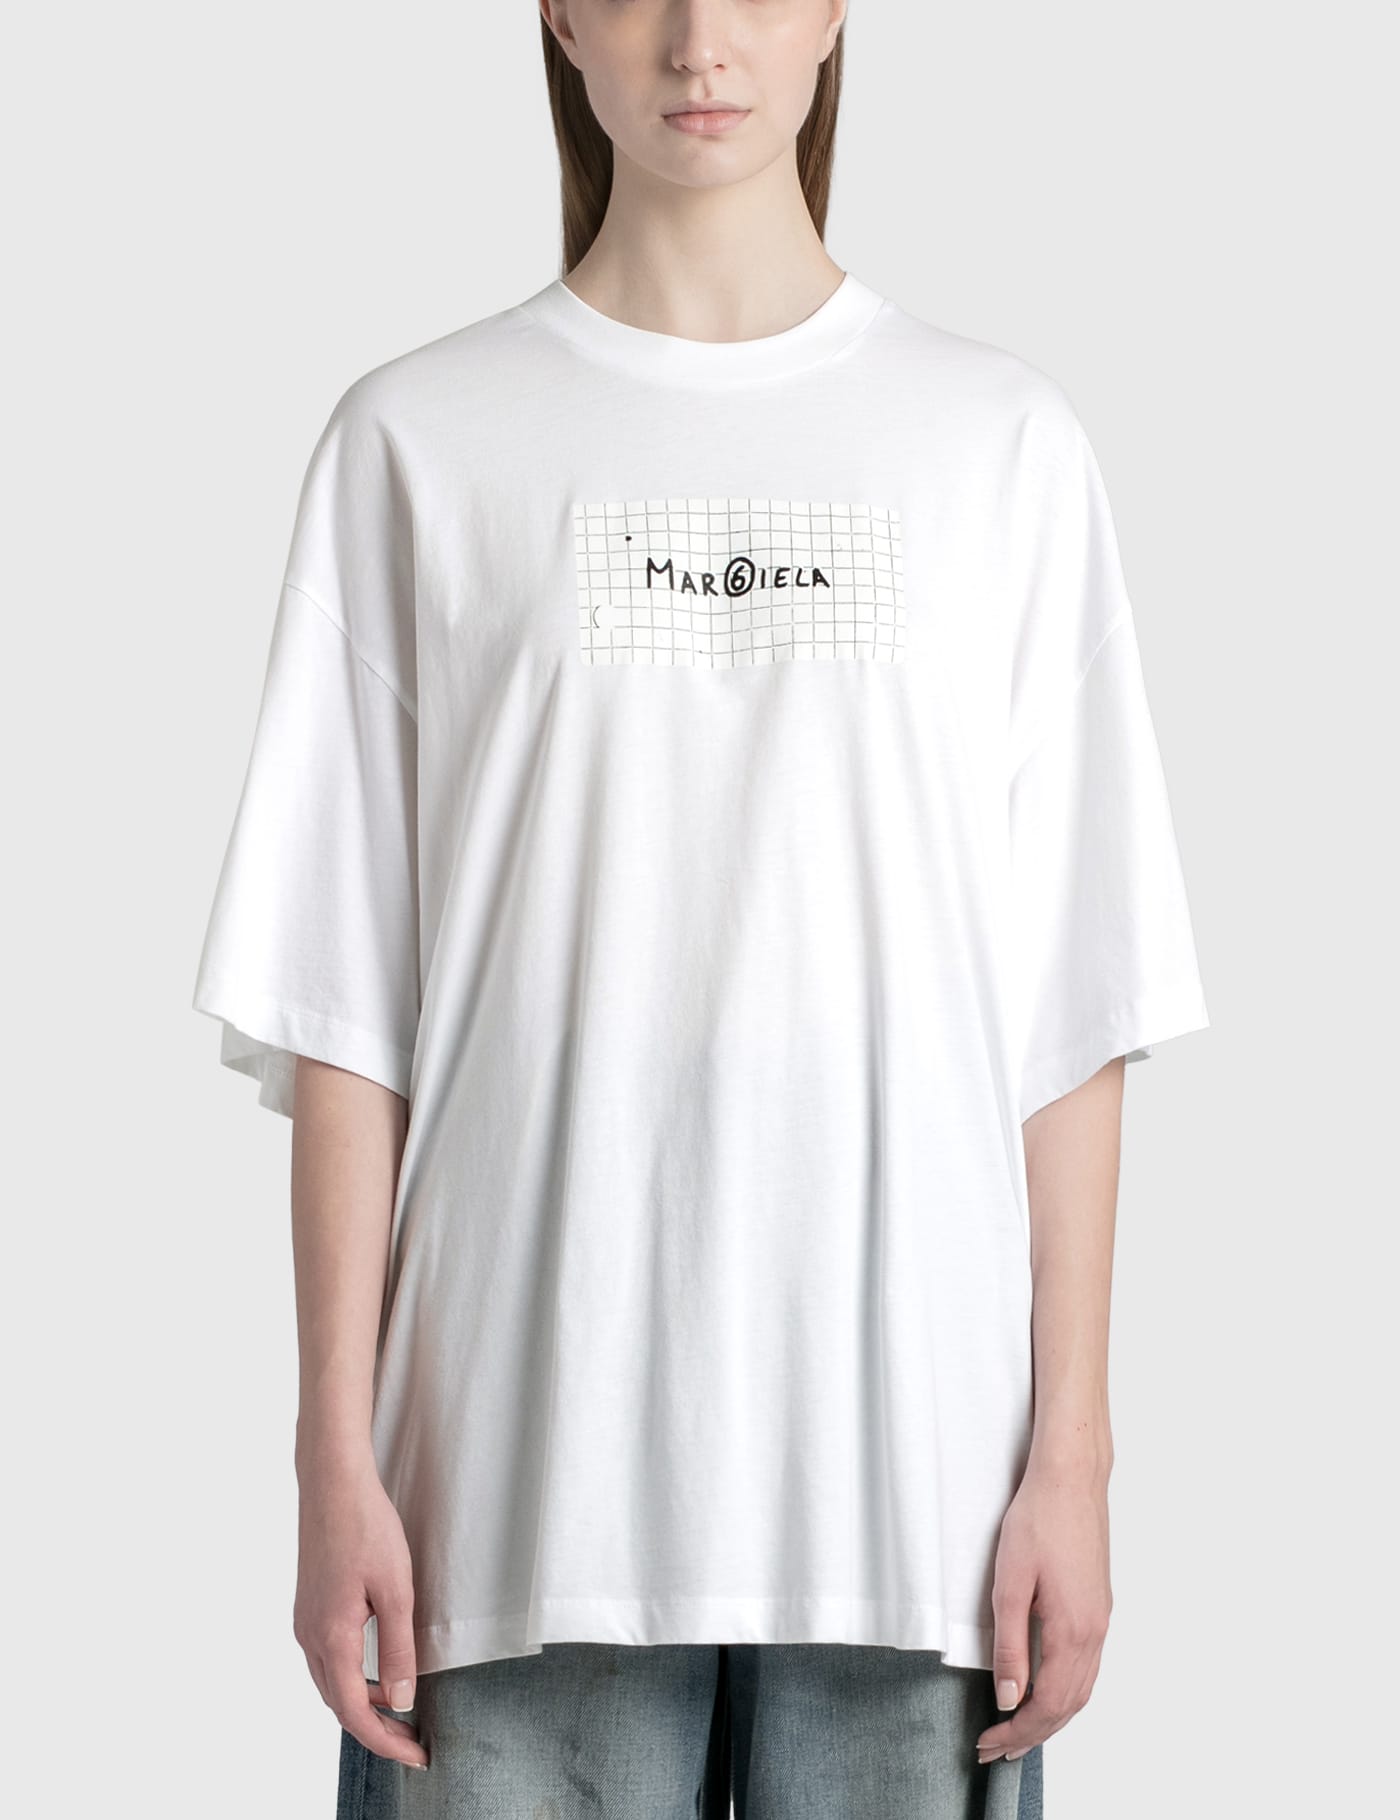 MM6 Maison Margiela - Margiela 6 Quaderno T-shirt | HBX - Globally Curated  Fashion and Lifestyle by Hypebeast